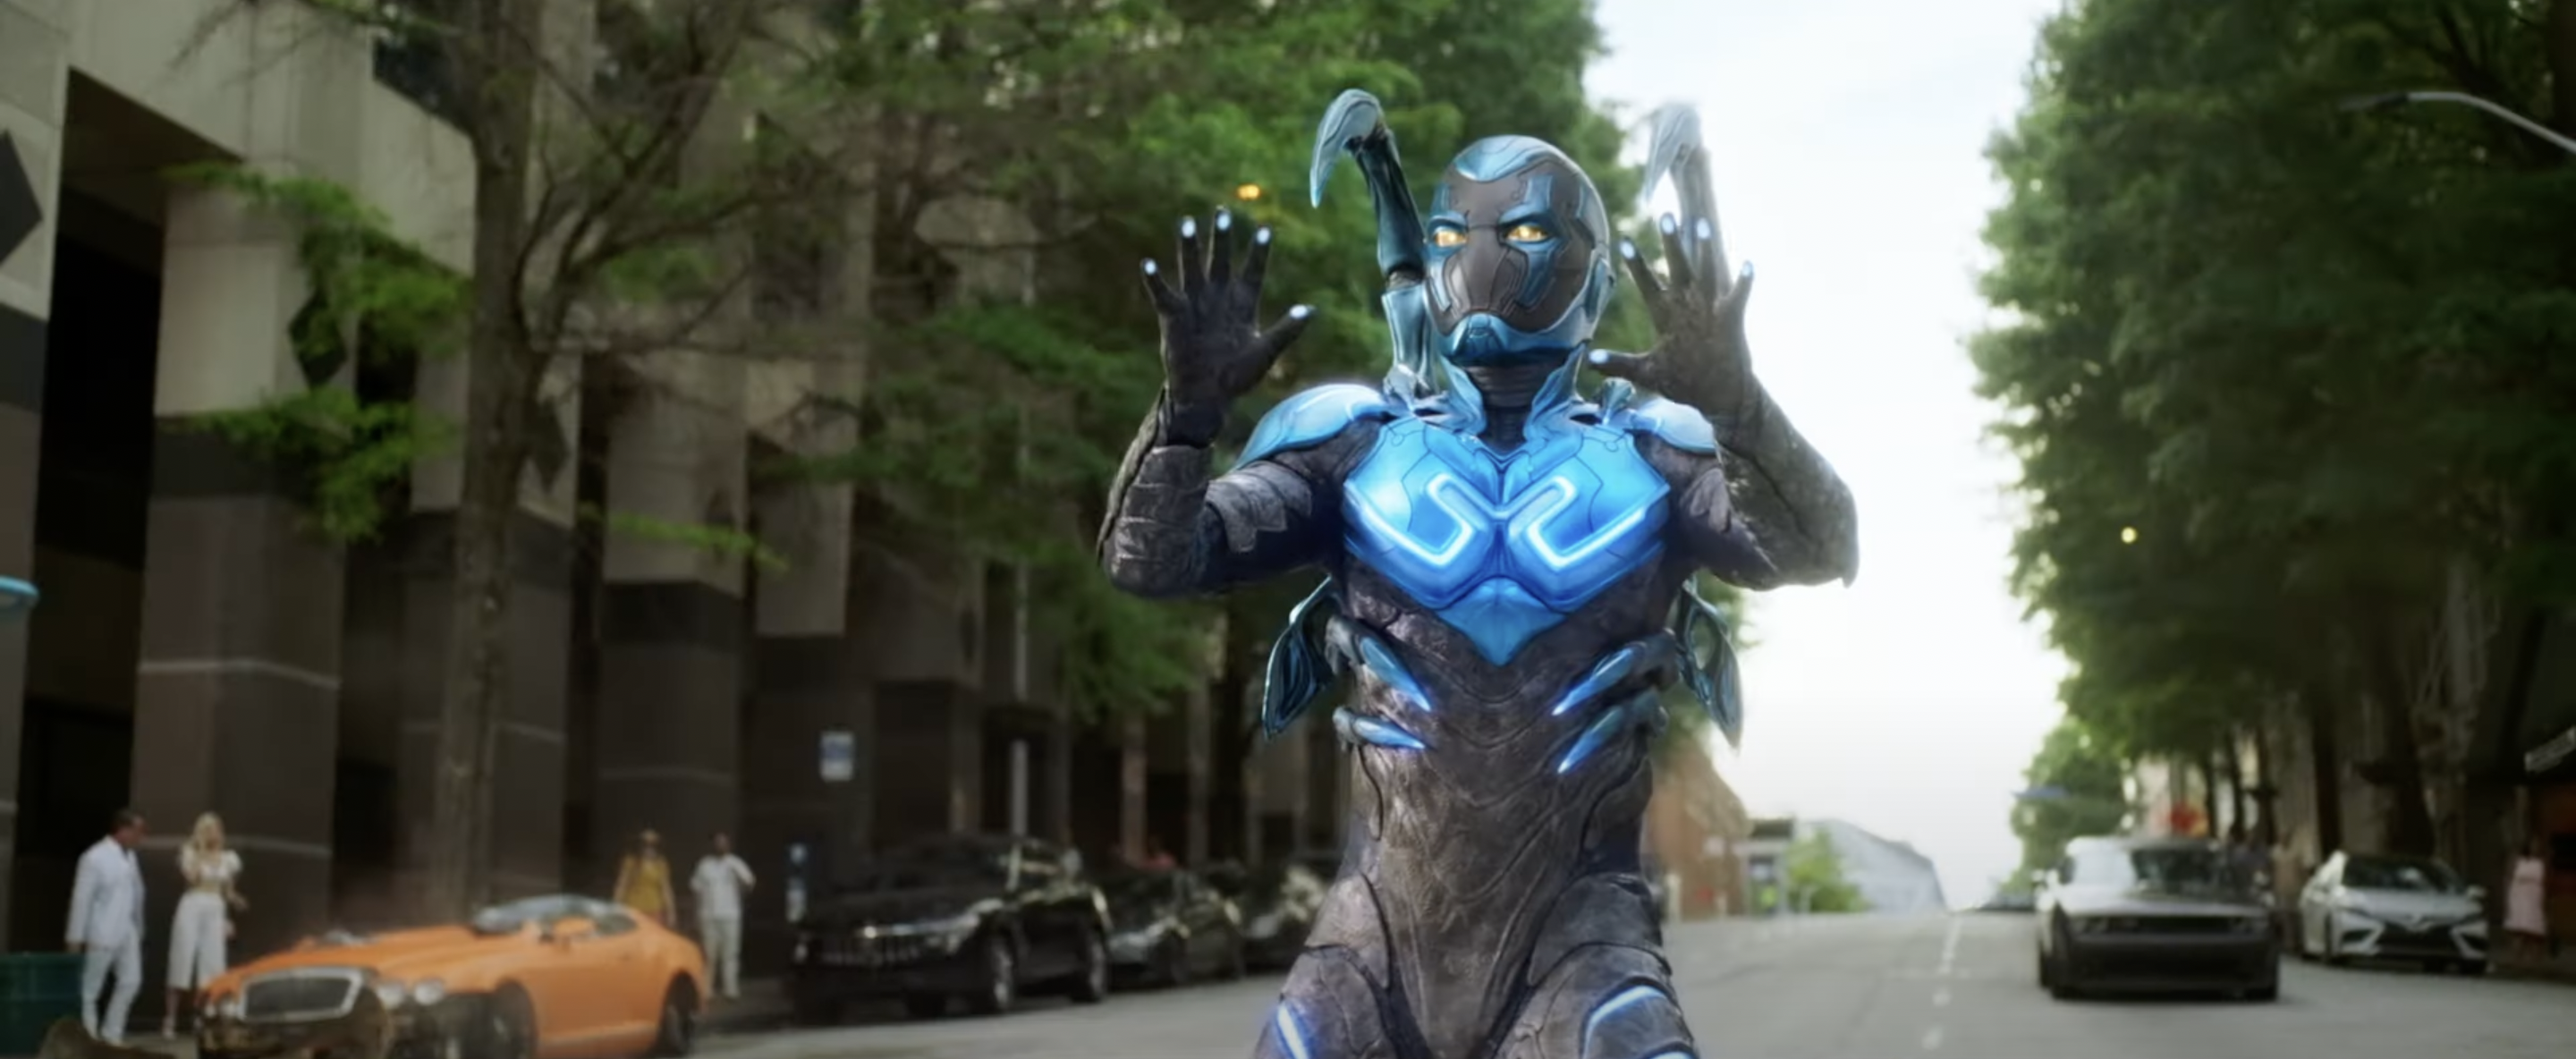 What to Watch This Weekend – Blue Beetle - LRM